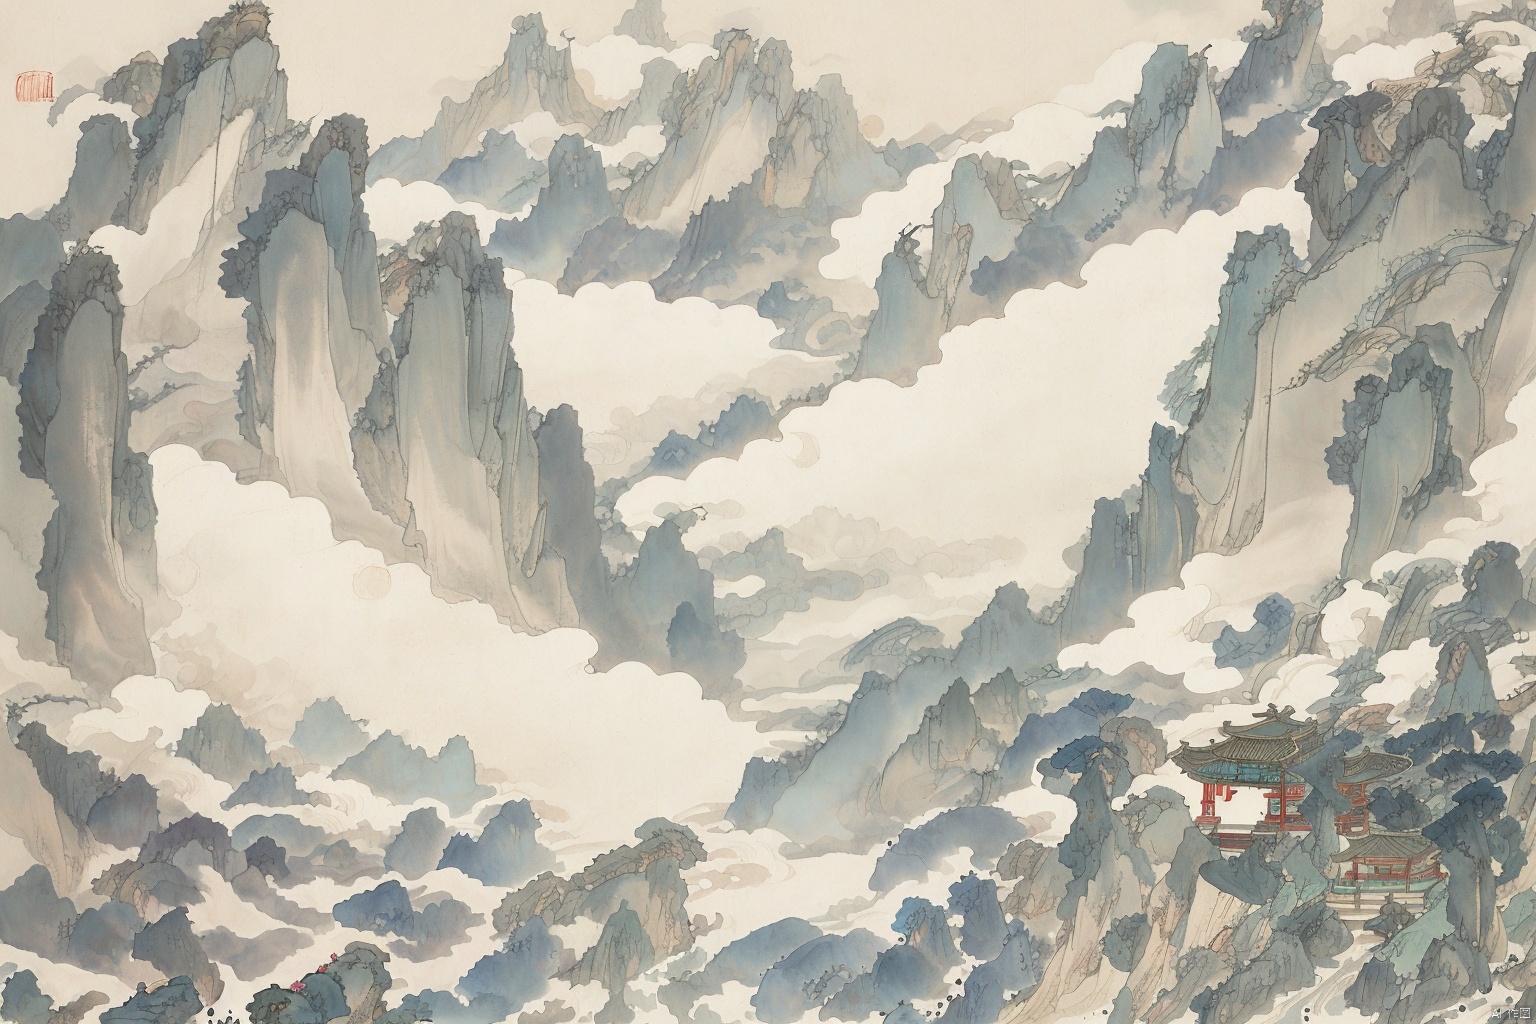  Chinese style ink landscape painting, trees, mountains, rivers, huts, boats, gf